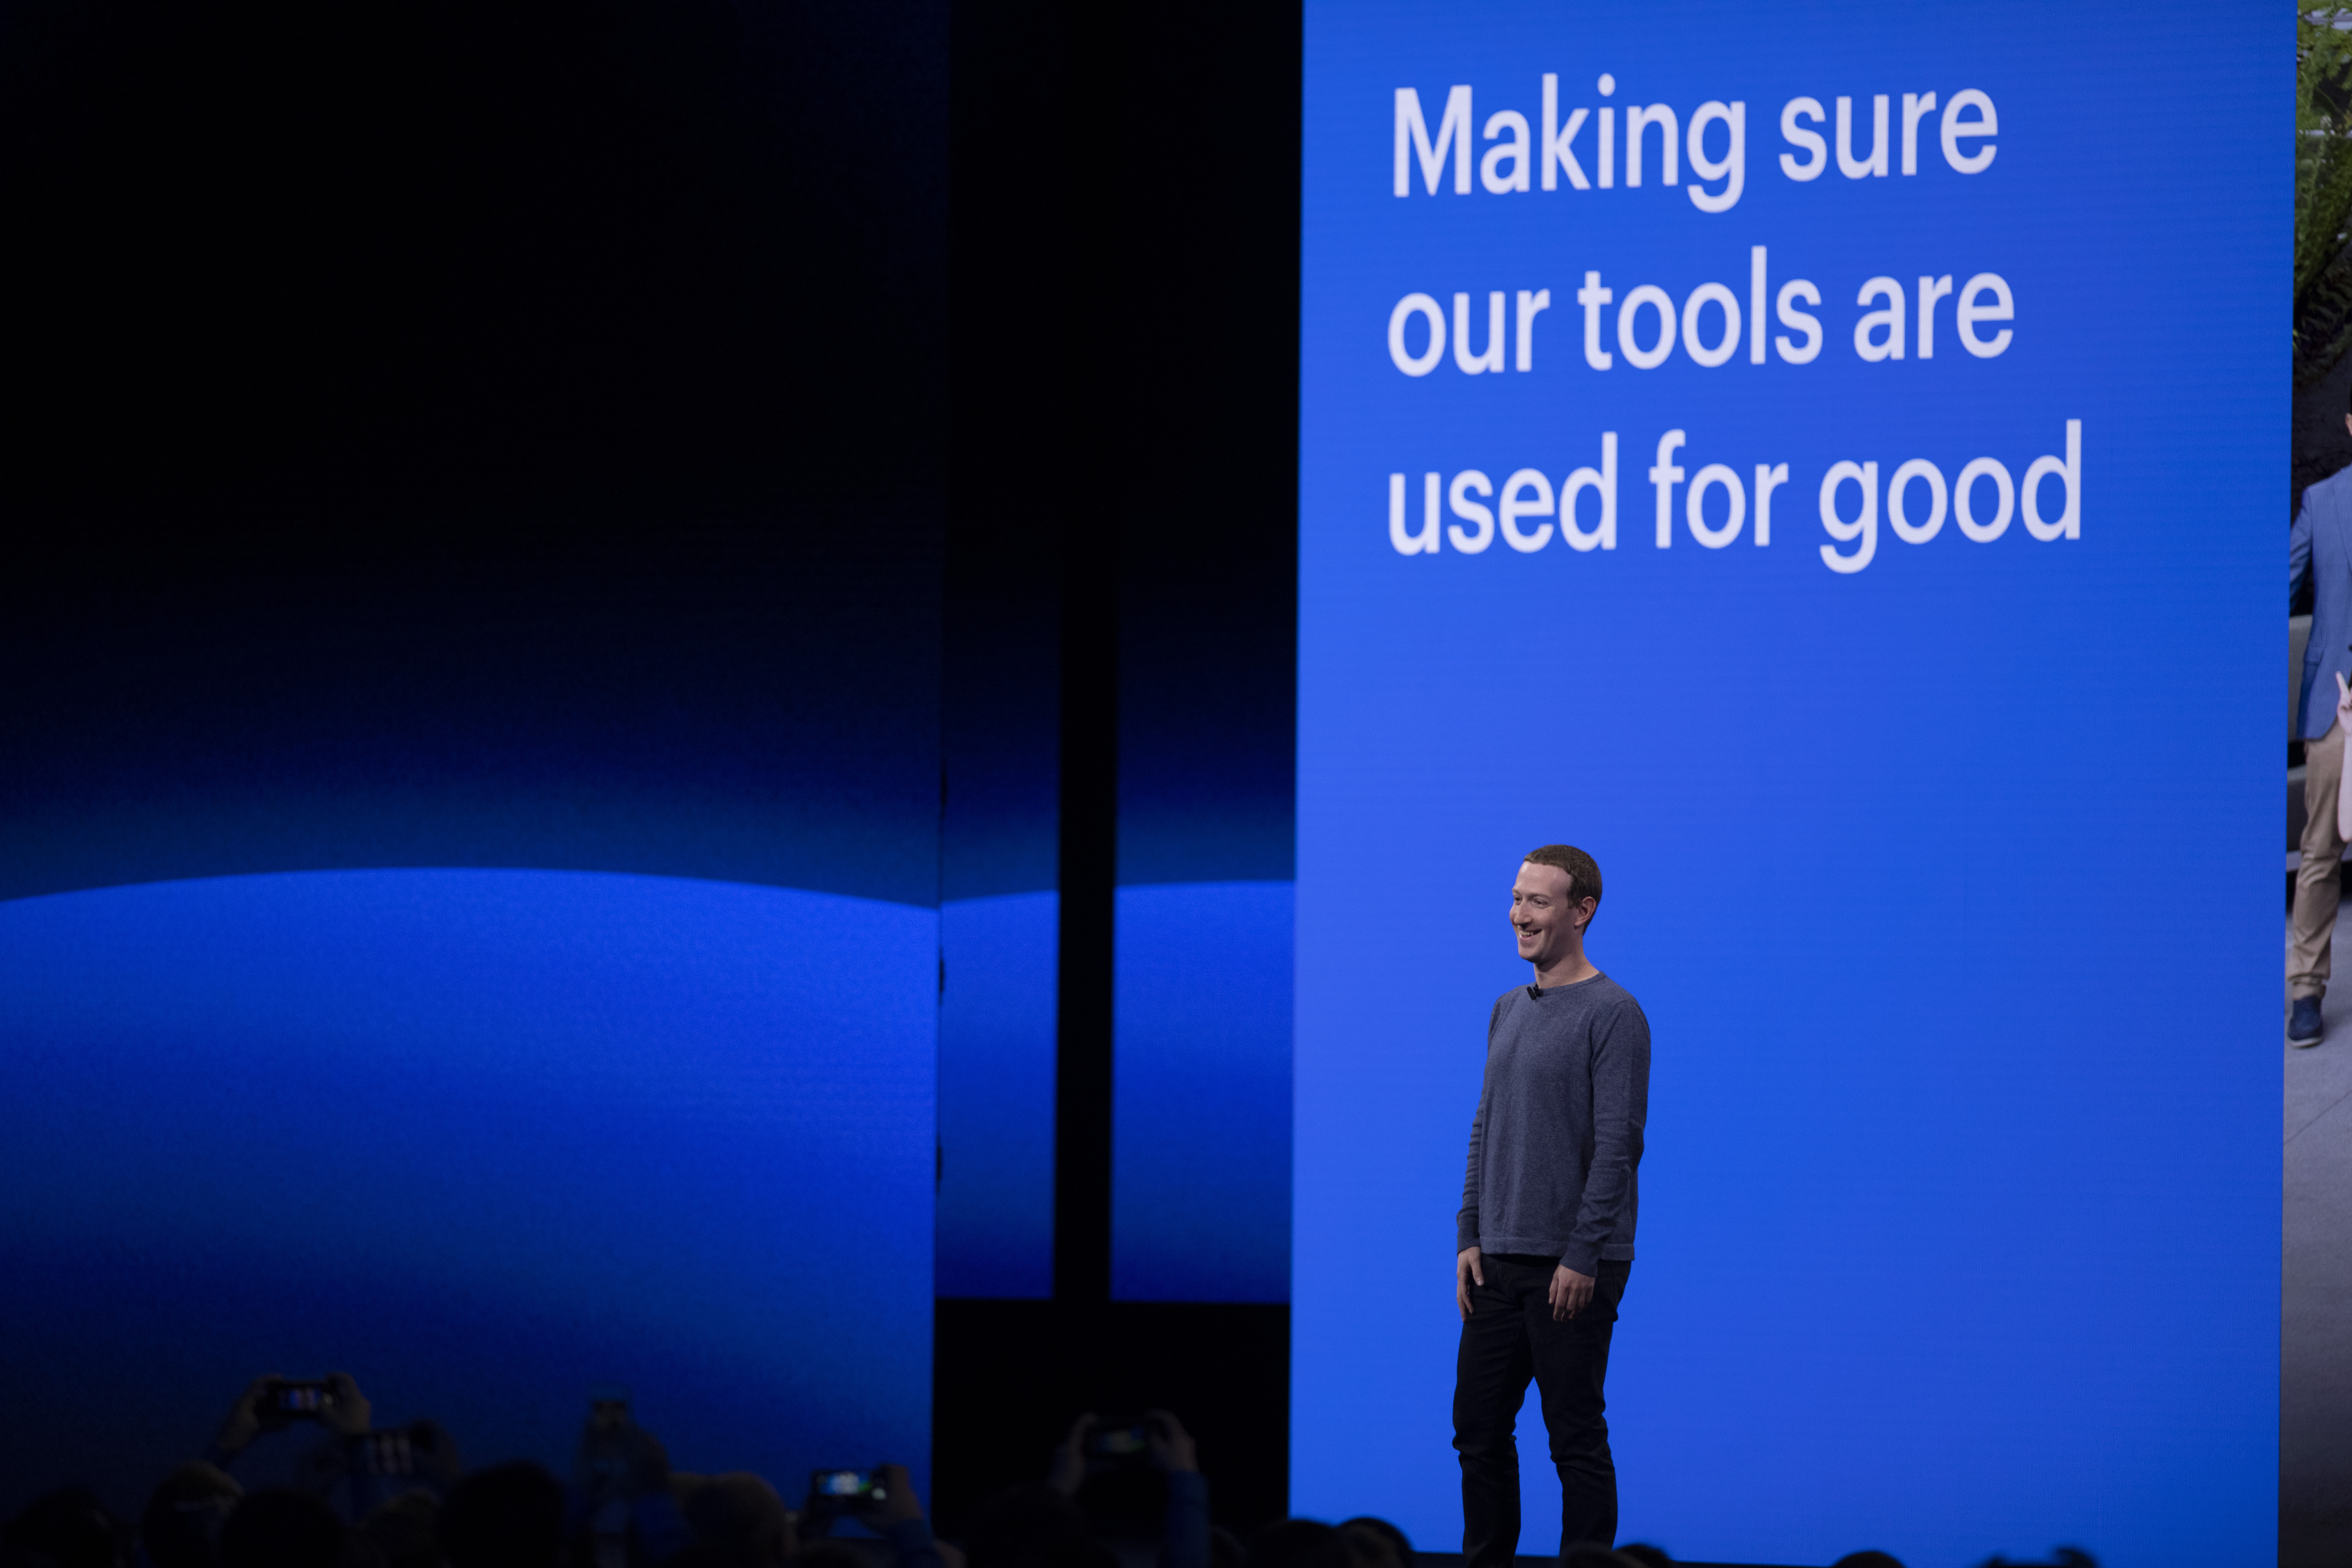 Facebook CEO Mark Zuckerberg delivered the keynote speech during Facebook Developer Conference F8 2019 at the McEnery Convention Center in San Jose, California.